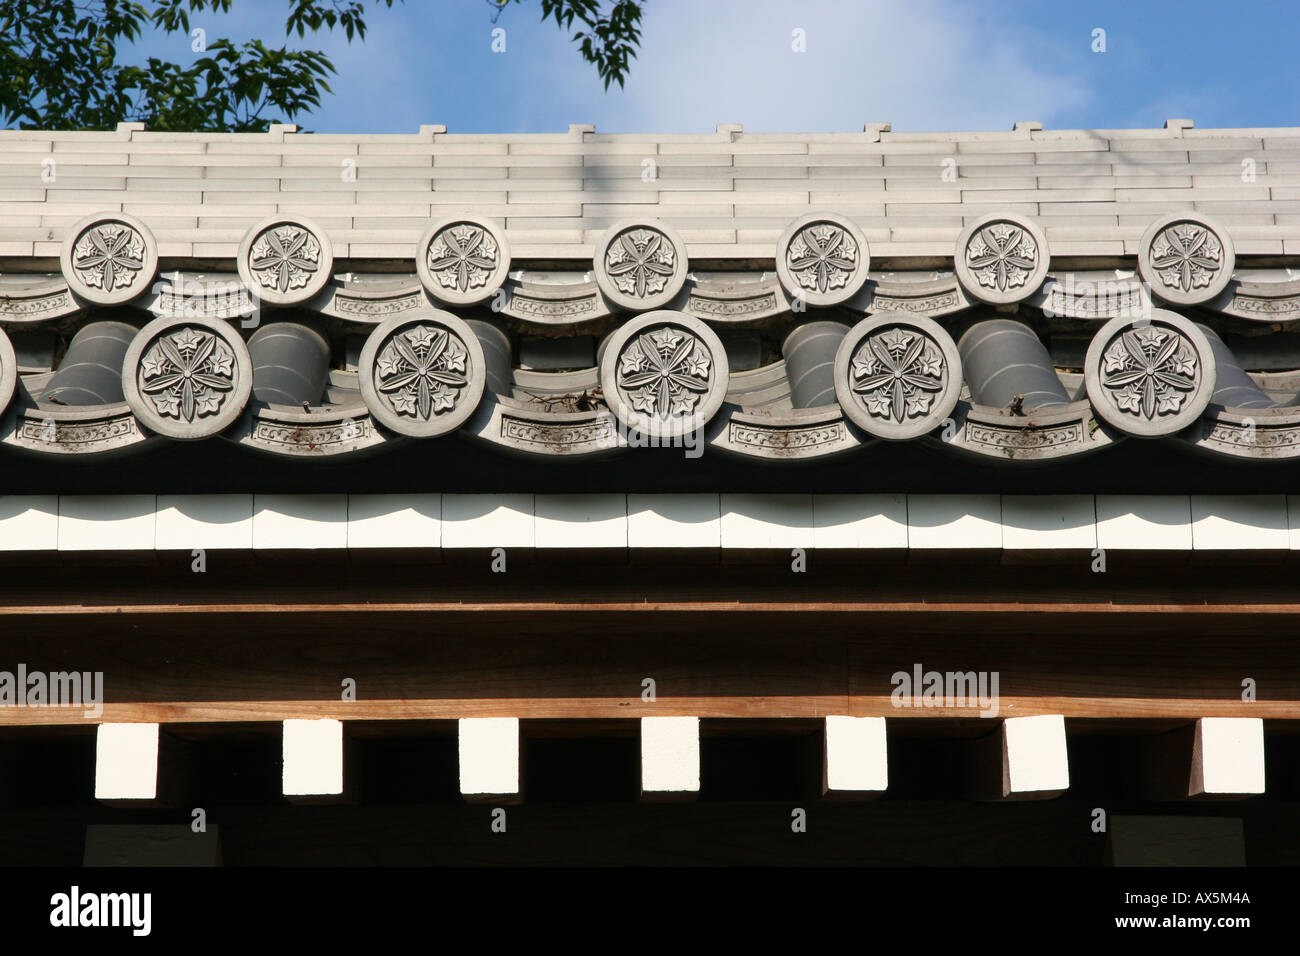 Traditional roof with family crest design in Kyoto, Japan Stock Photo